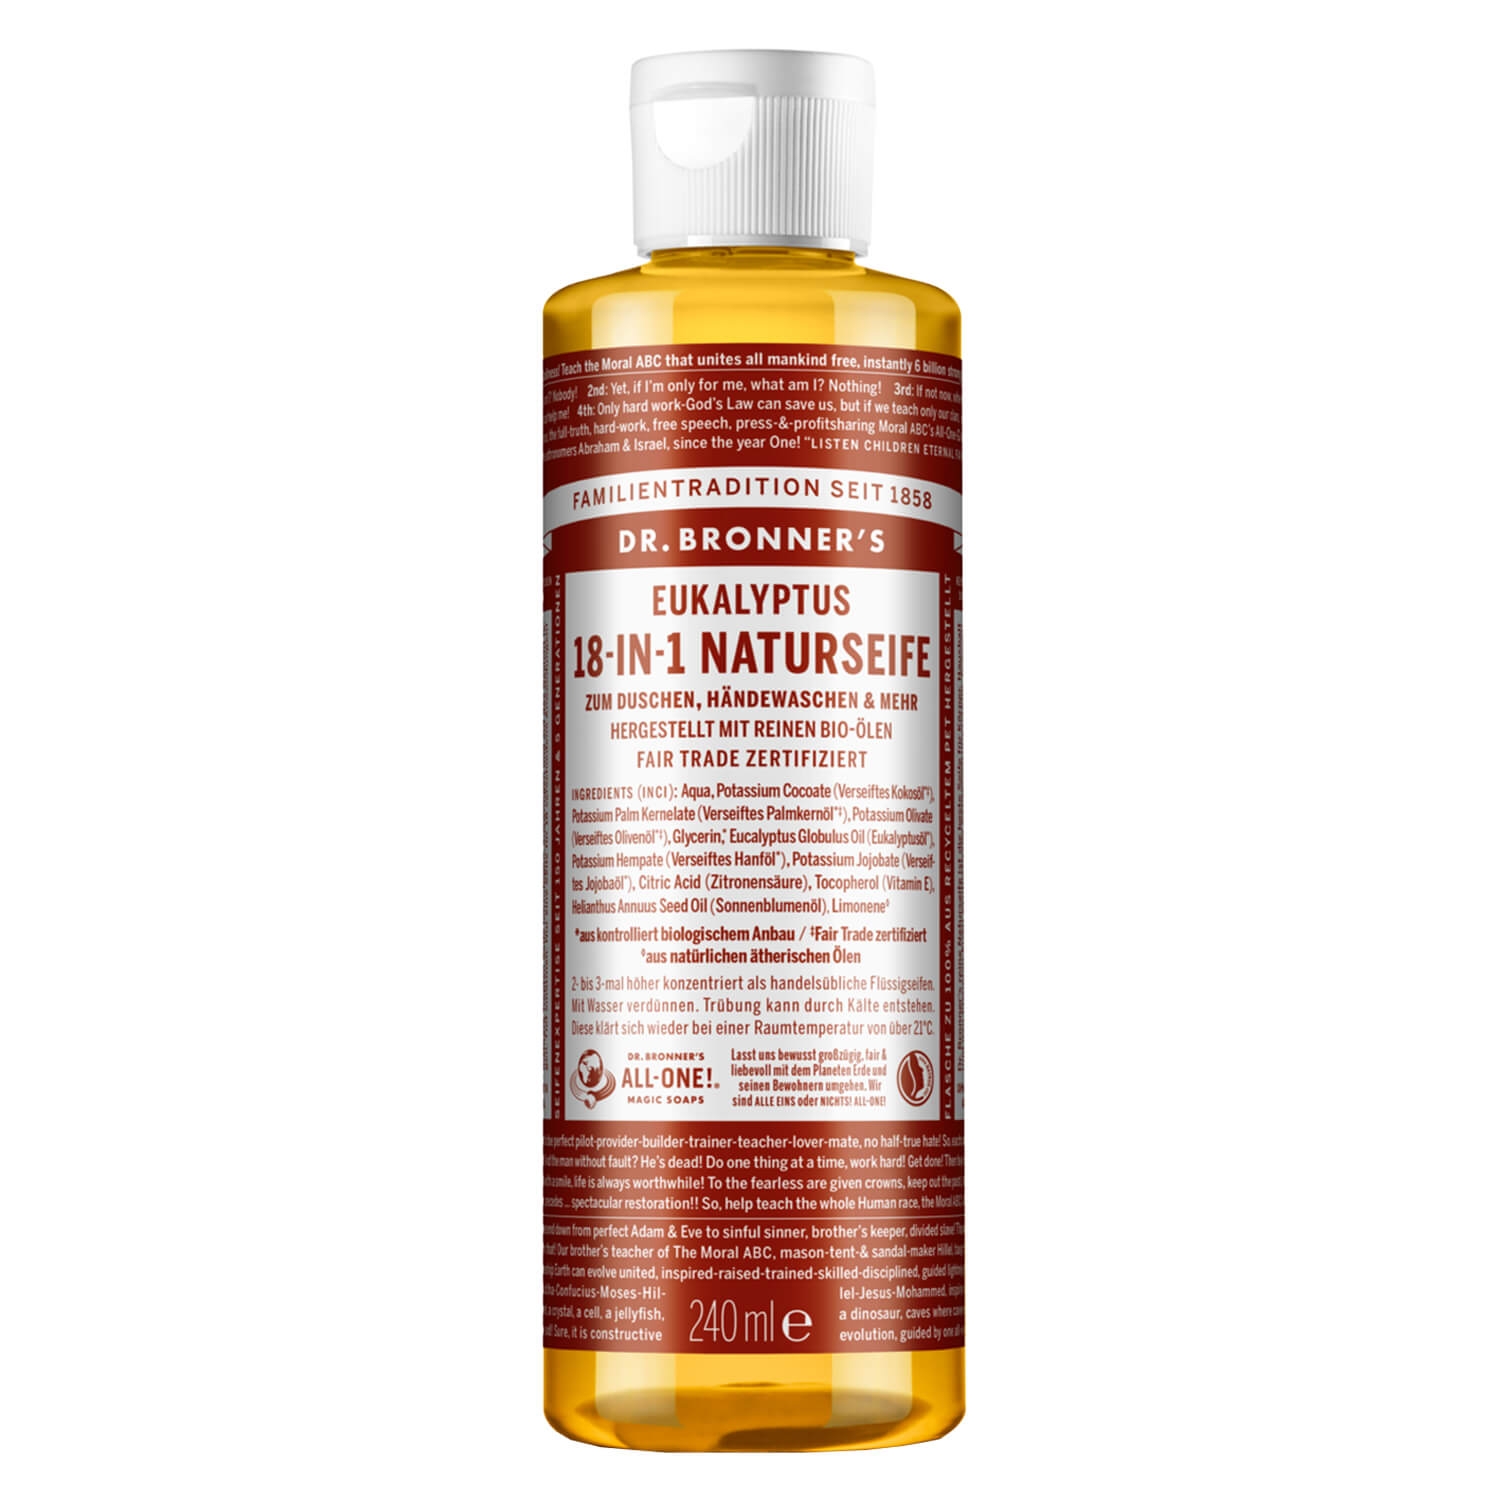 Product image from DR. BRONNER'S - 18-IN-1 Flüssigseife Eukalyptus